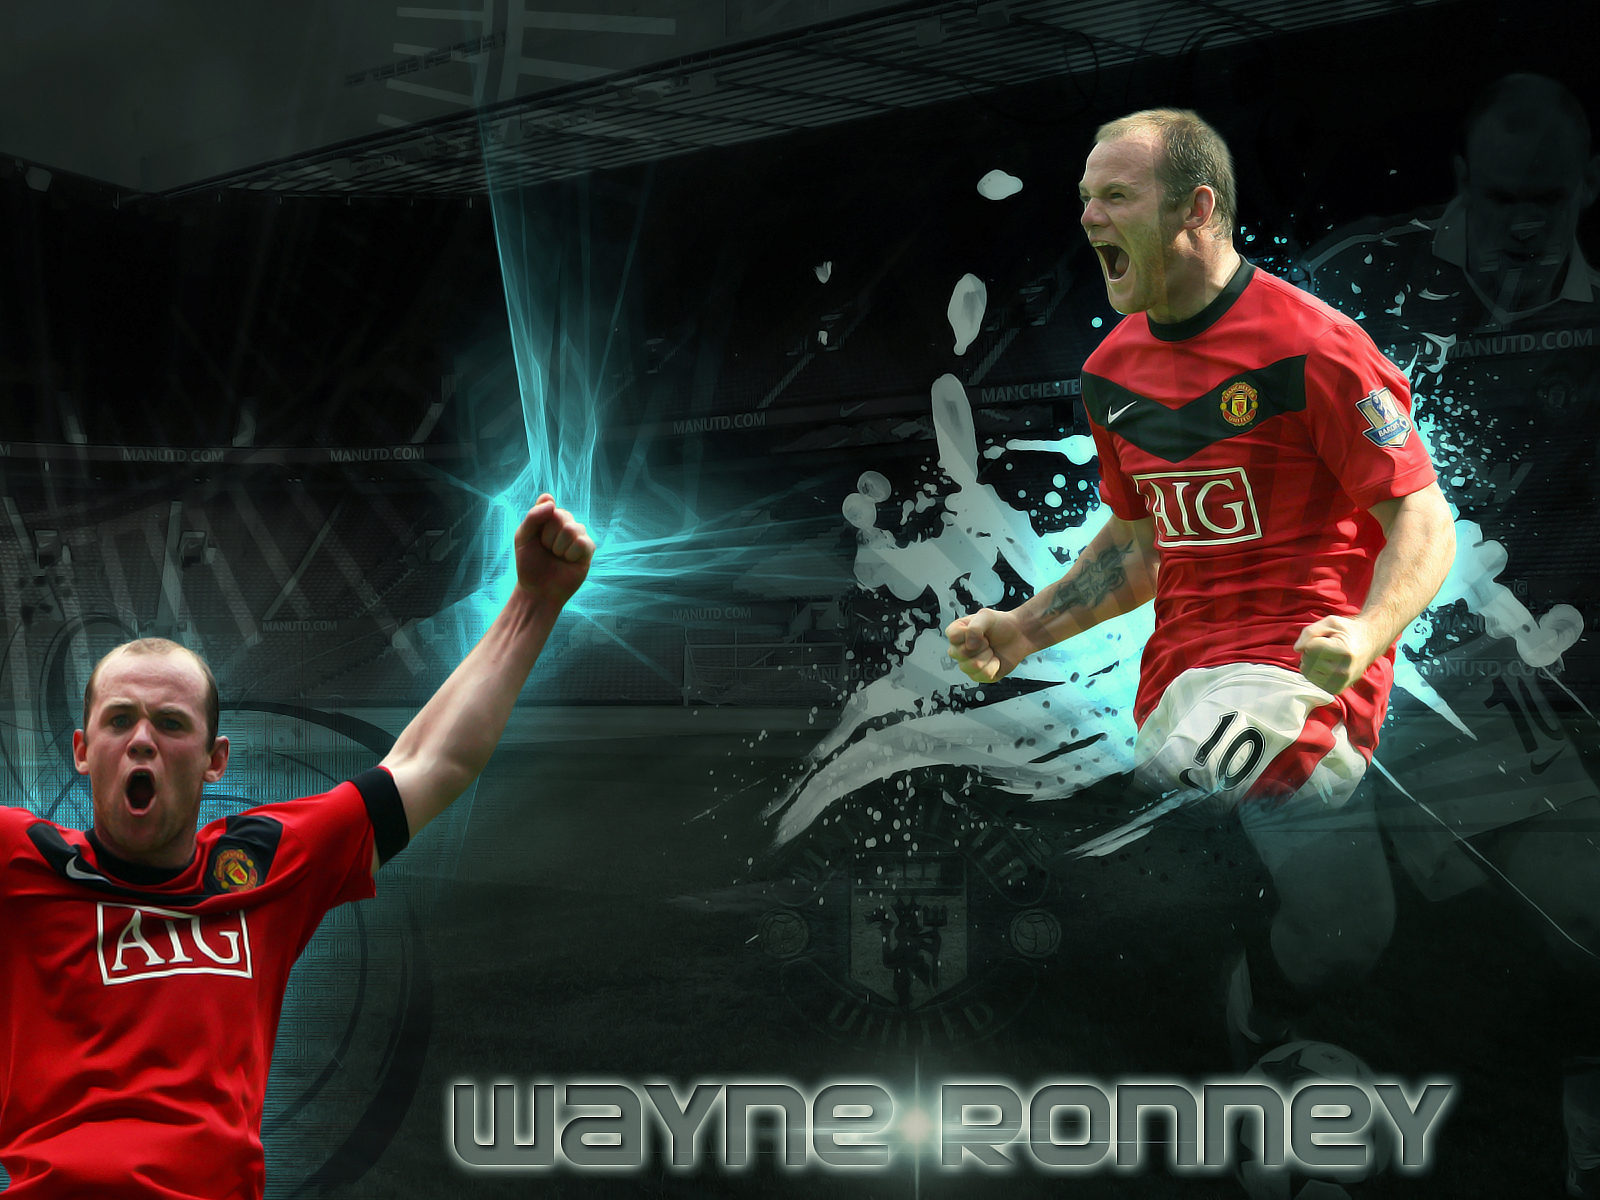 The Forward Of Manchester United Wayne Rooney On Dark - Player , HD Wallpaper & Backgrounds